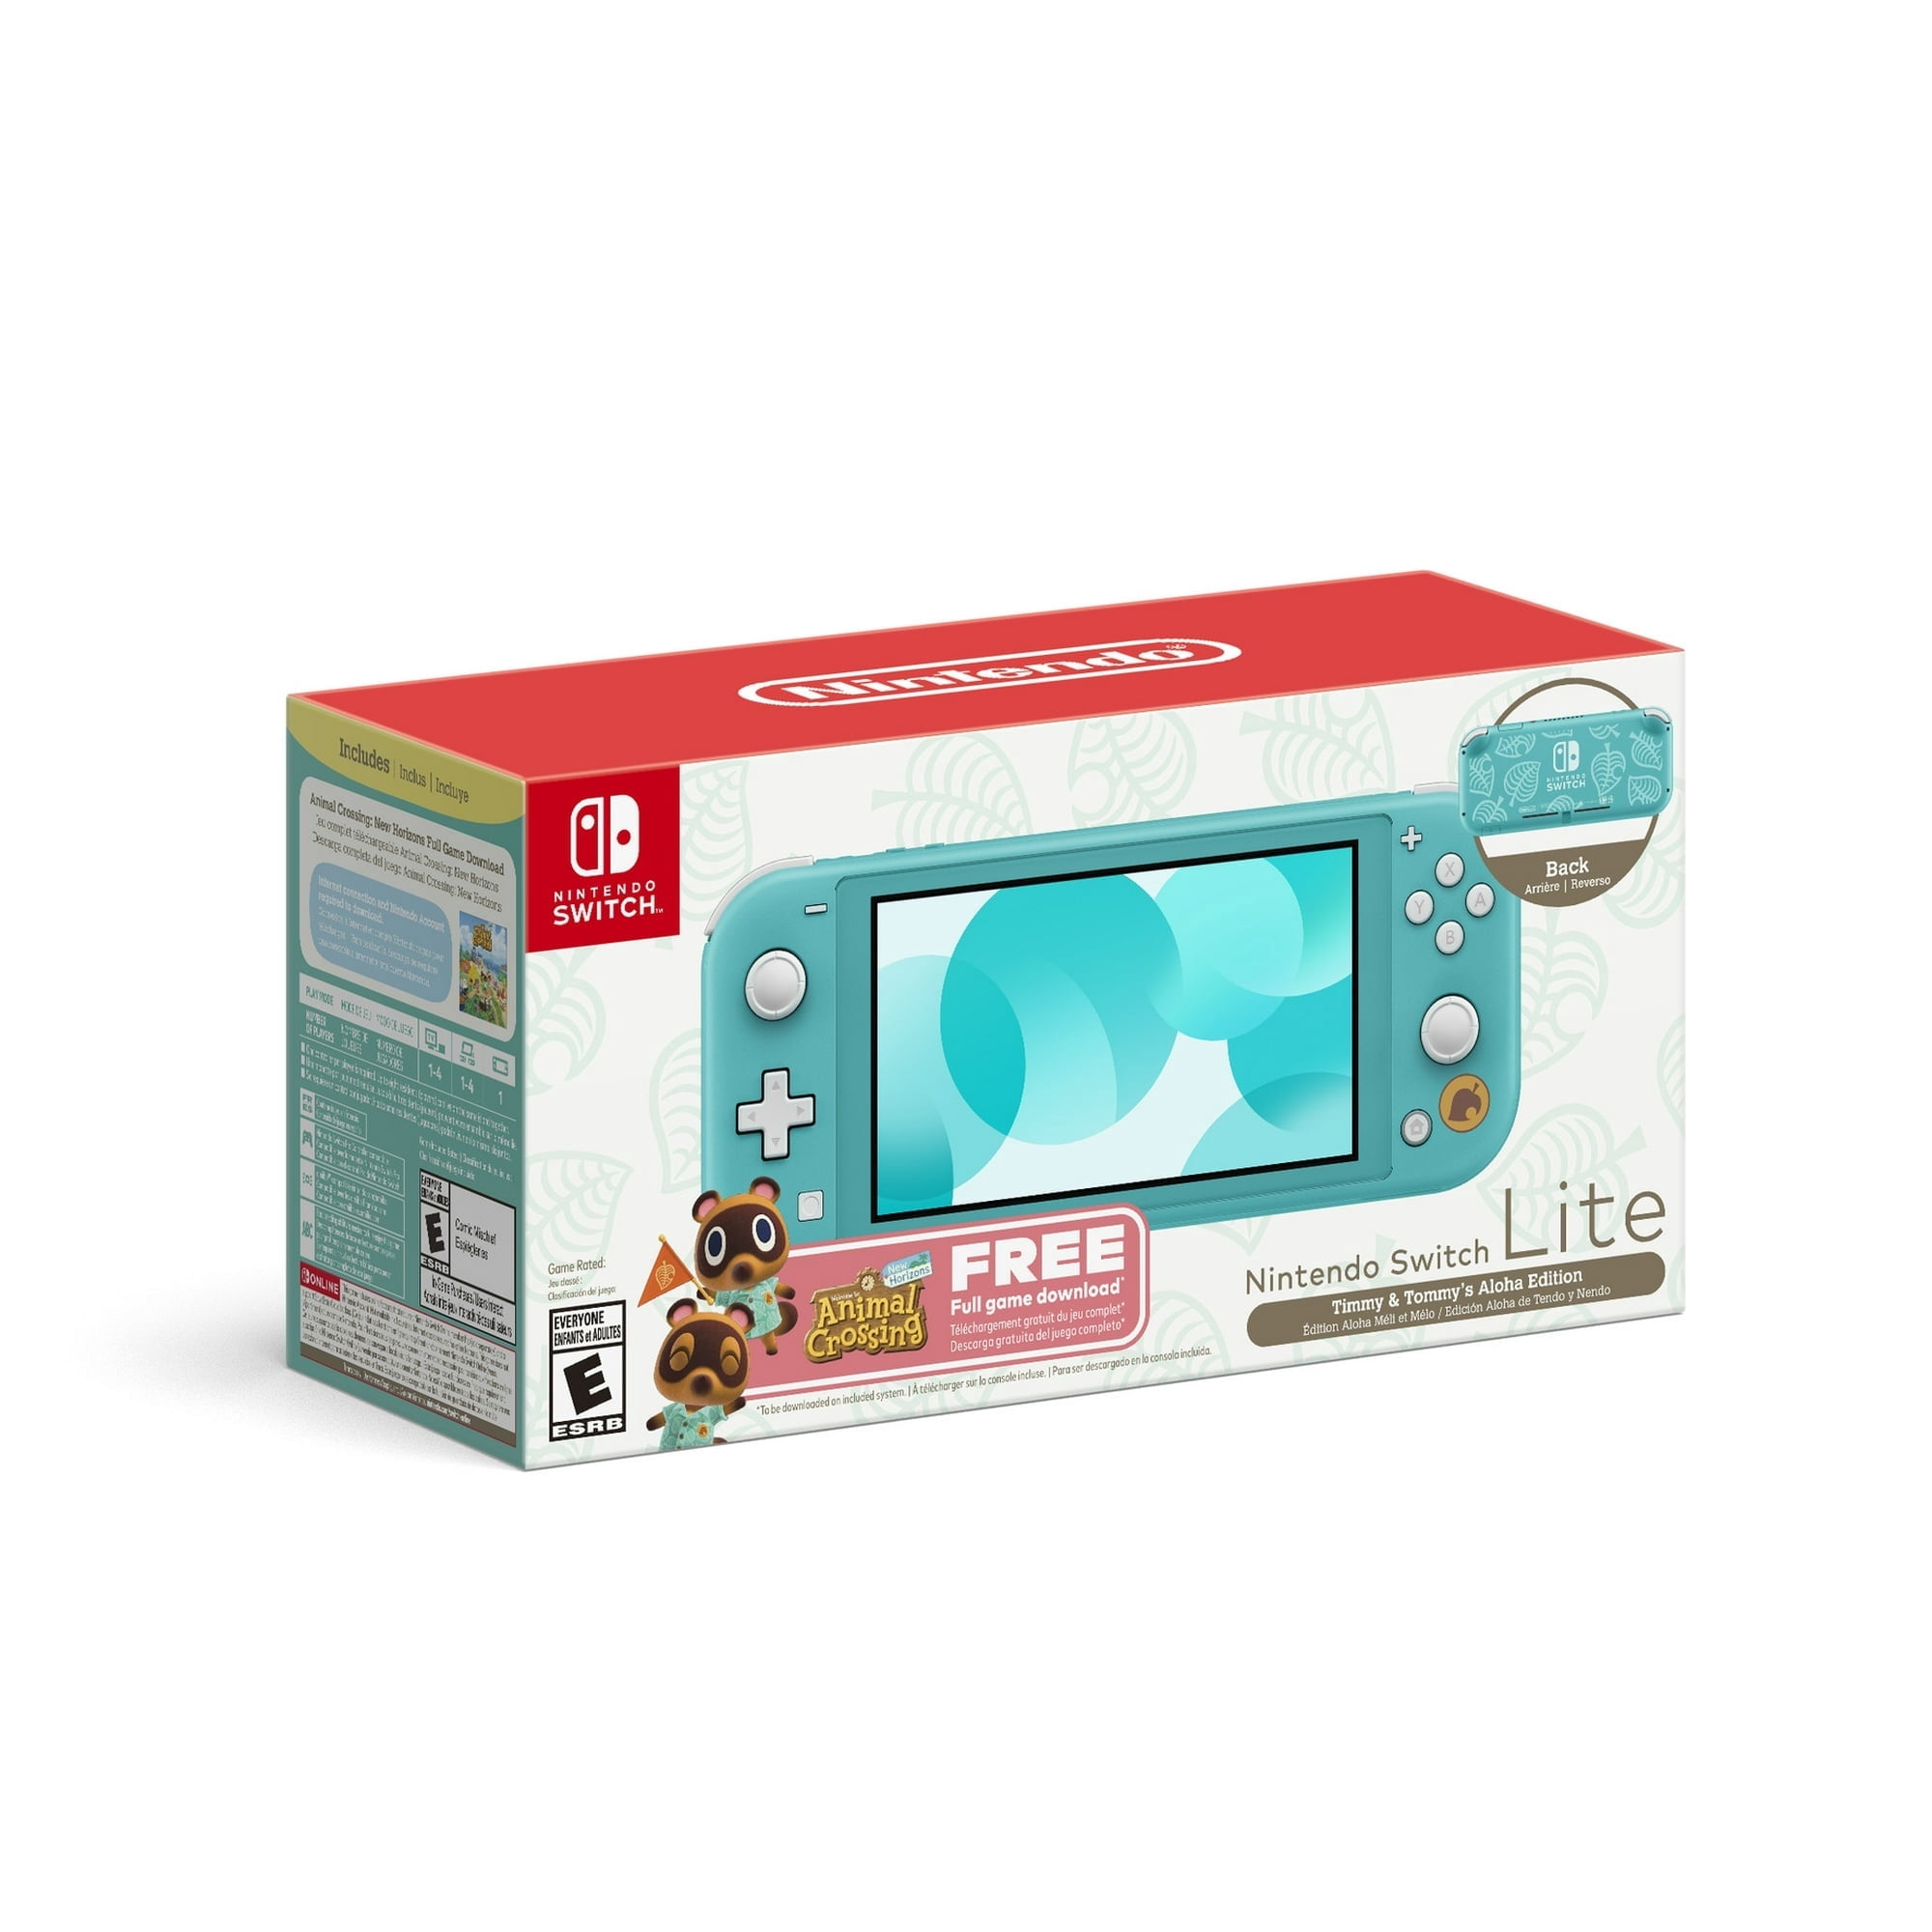 Nintendo Switch Lite Console, Turquoise - Animal Crossing: New Horizons  Bundle - Timmy and Tommy's Aloha Edition - International Spec (Functional  in 